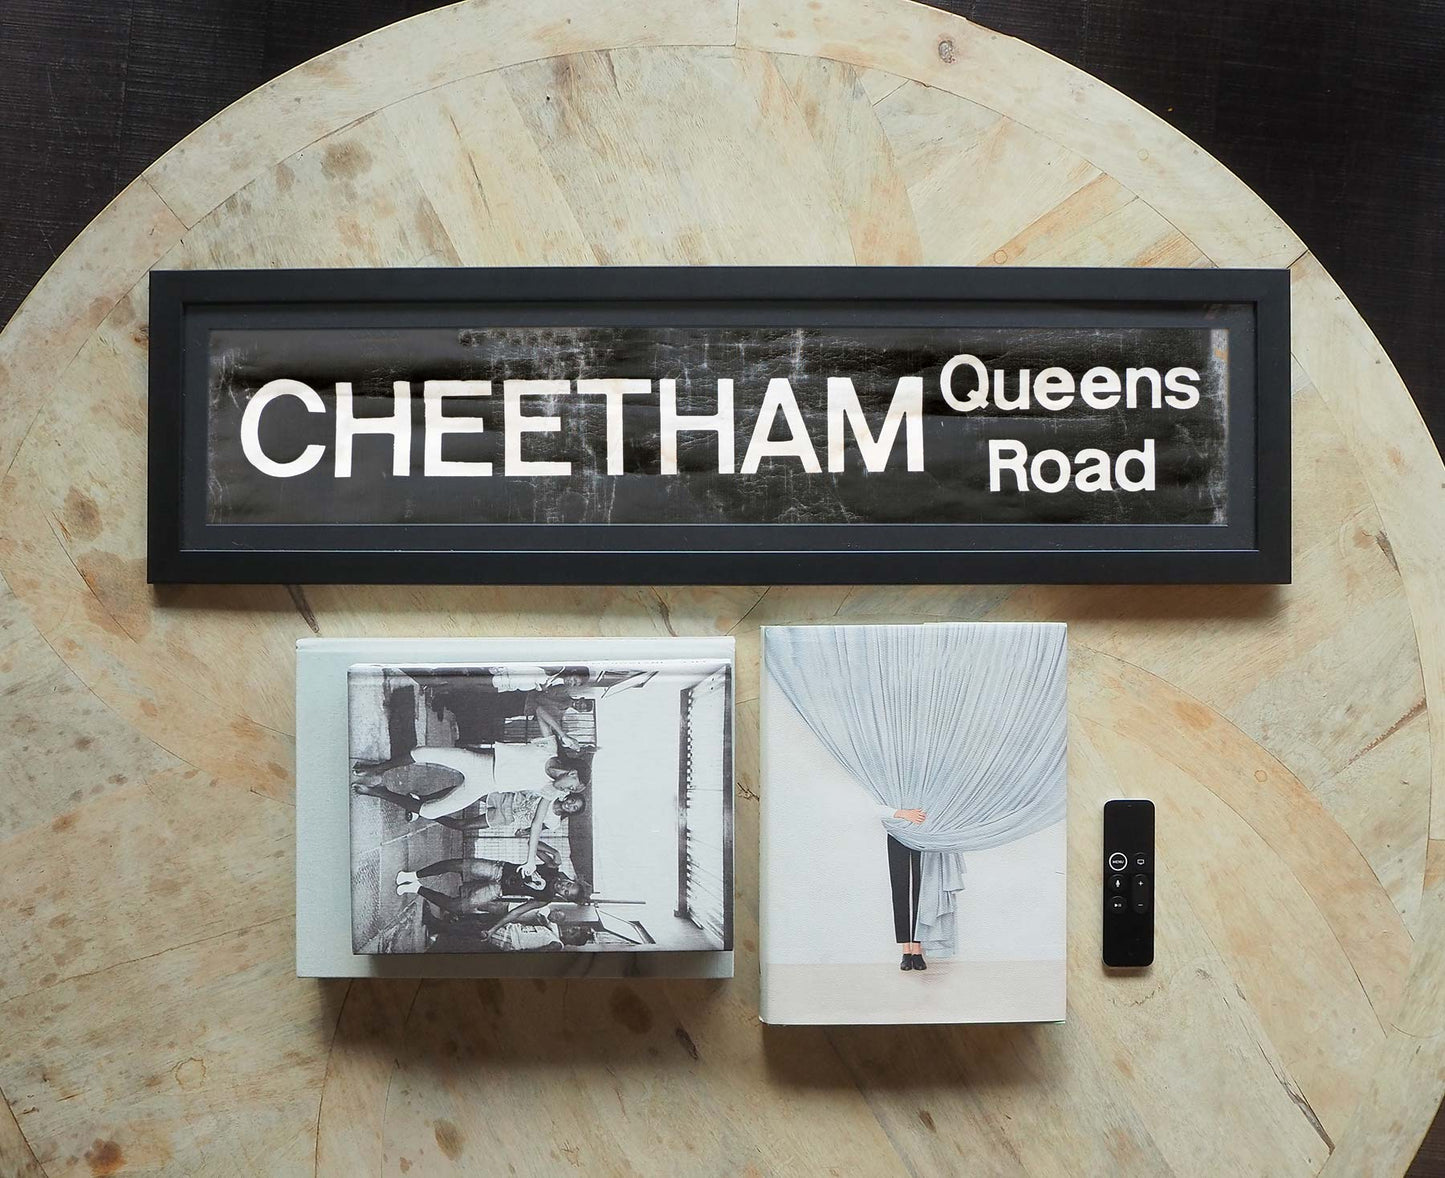 Cheetham Queens Road Framed Bus Blind